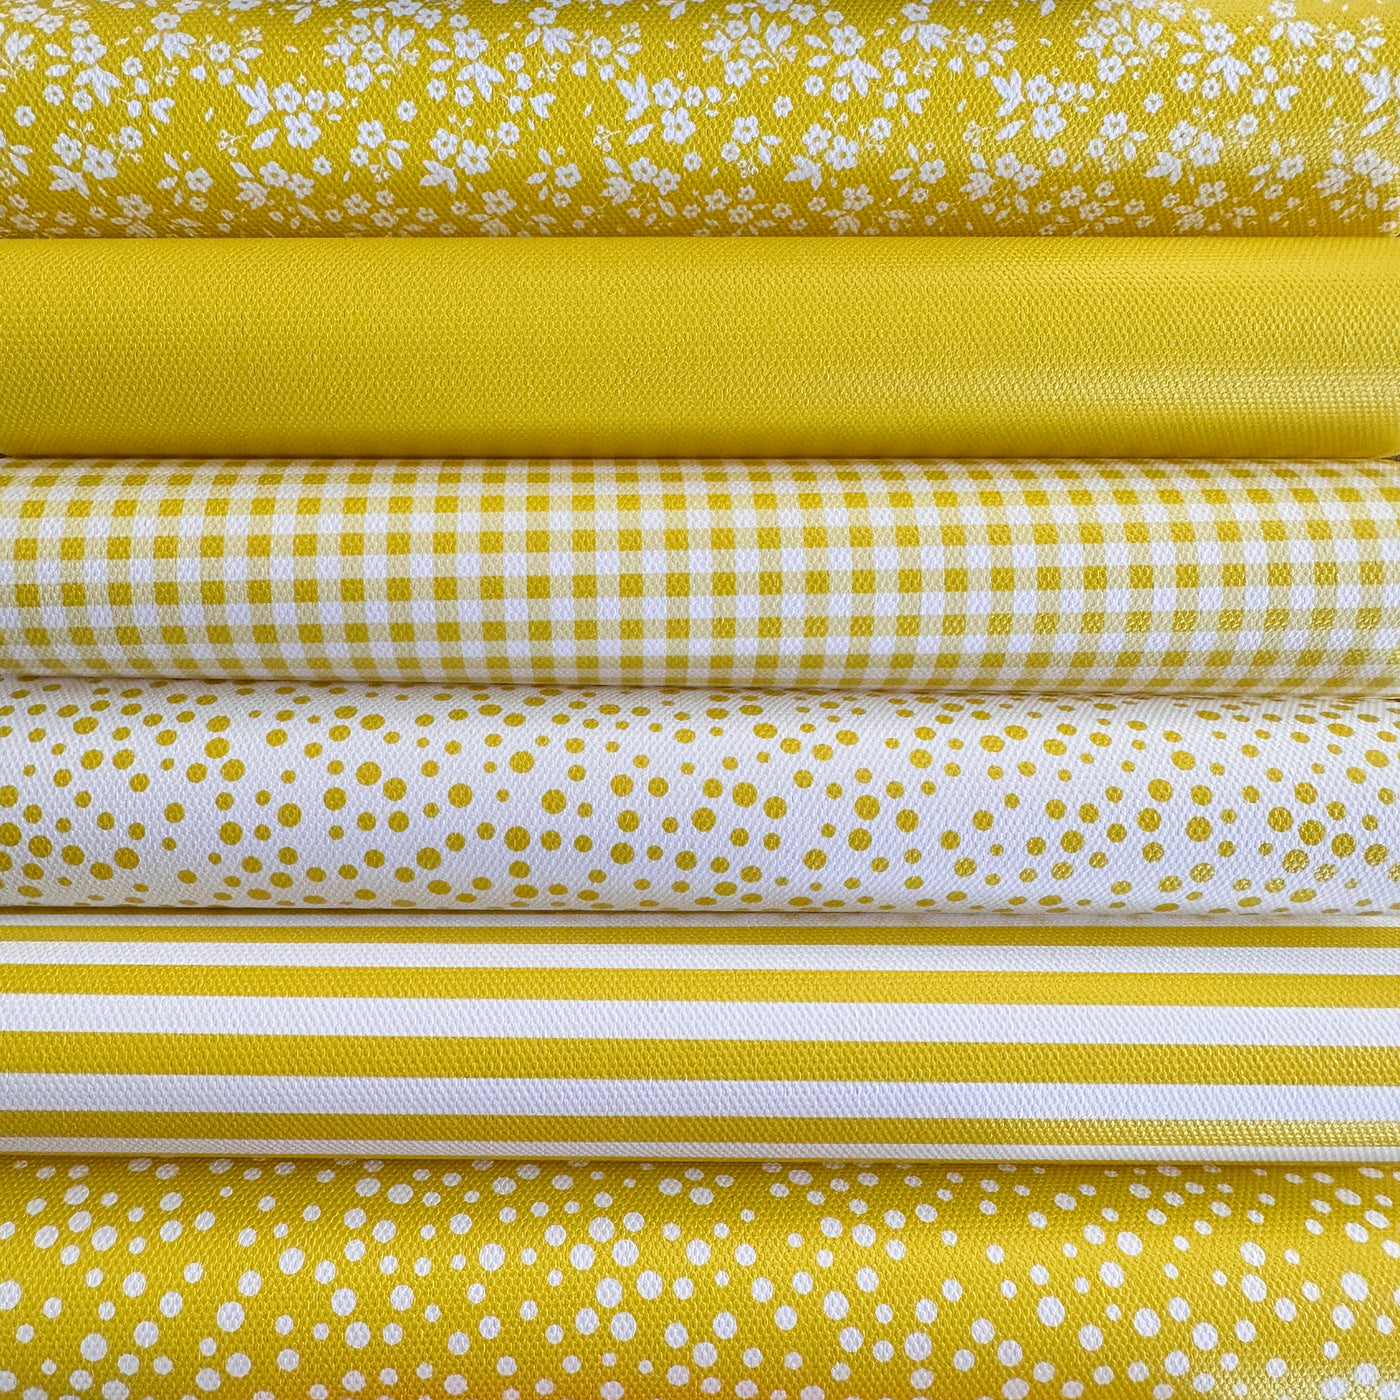 School yellow gingham solid stripe dots flower - faux Pu Leather vinyl - canvas - choose Fabric material Sheets